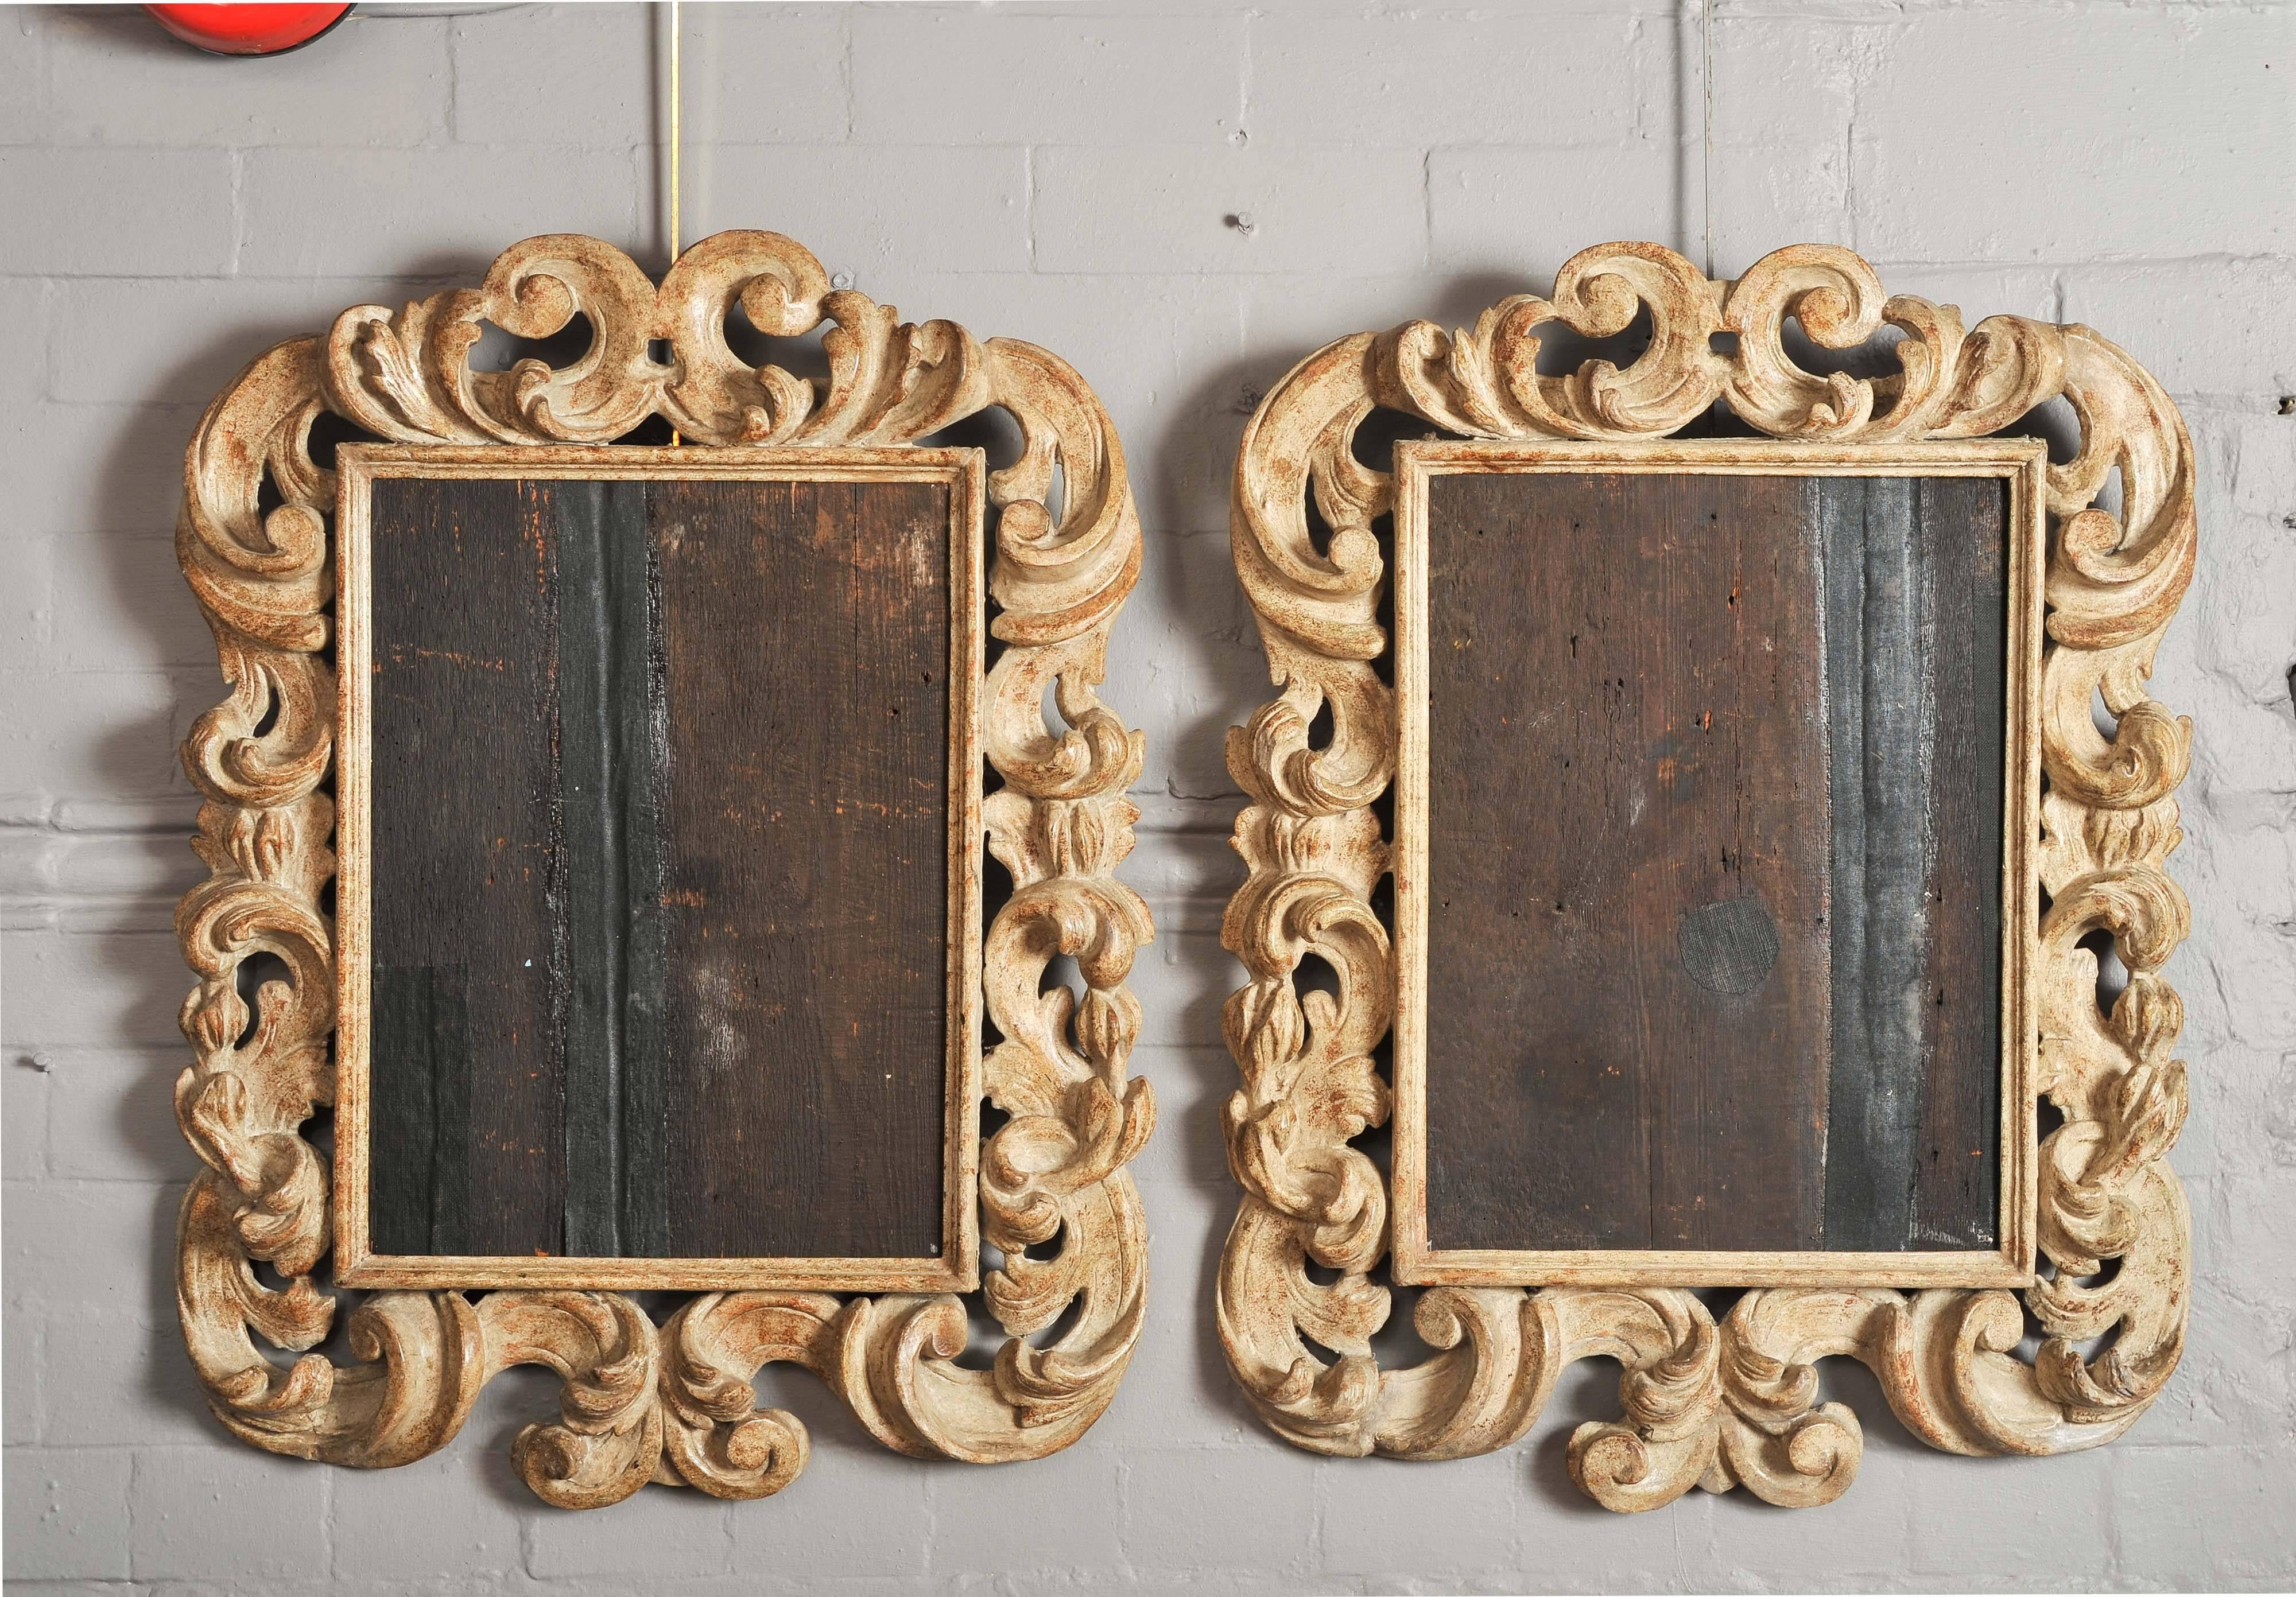 This extremely rare pair of Italian frames originally for a pair of 17th century portraits but would make a superb pair of mirrors. The finish made to simulate stone work as was fashionable at the time.
Internal dimensions for painting or mirror: